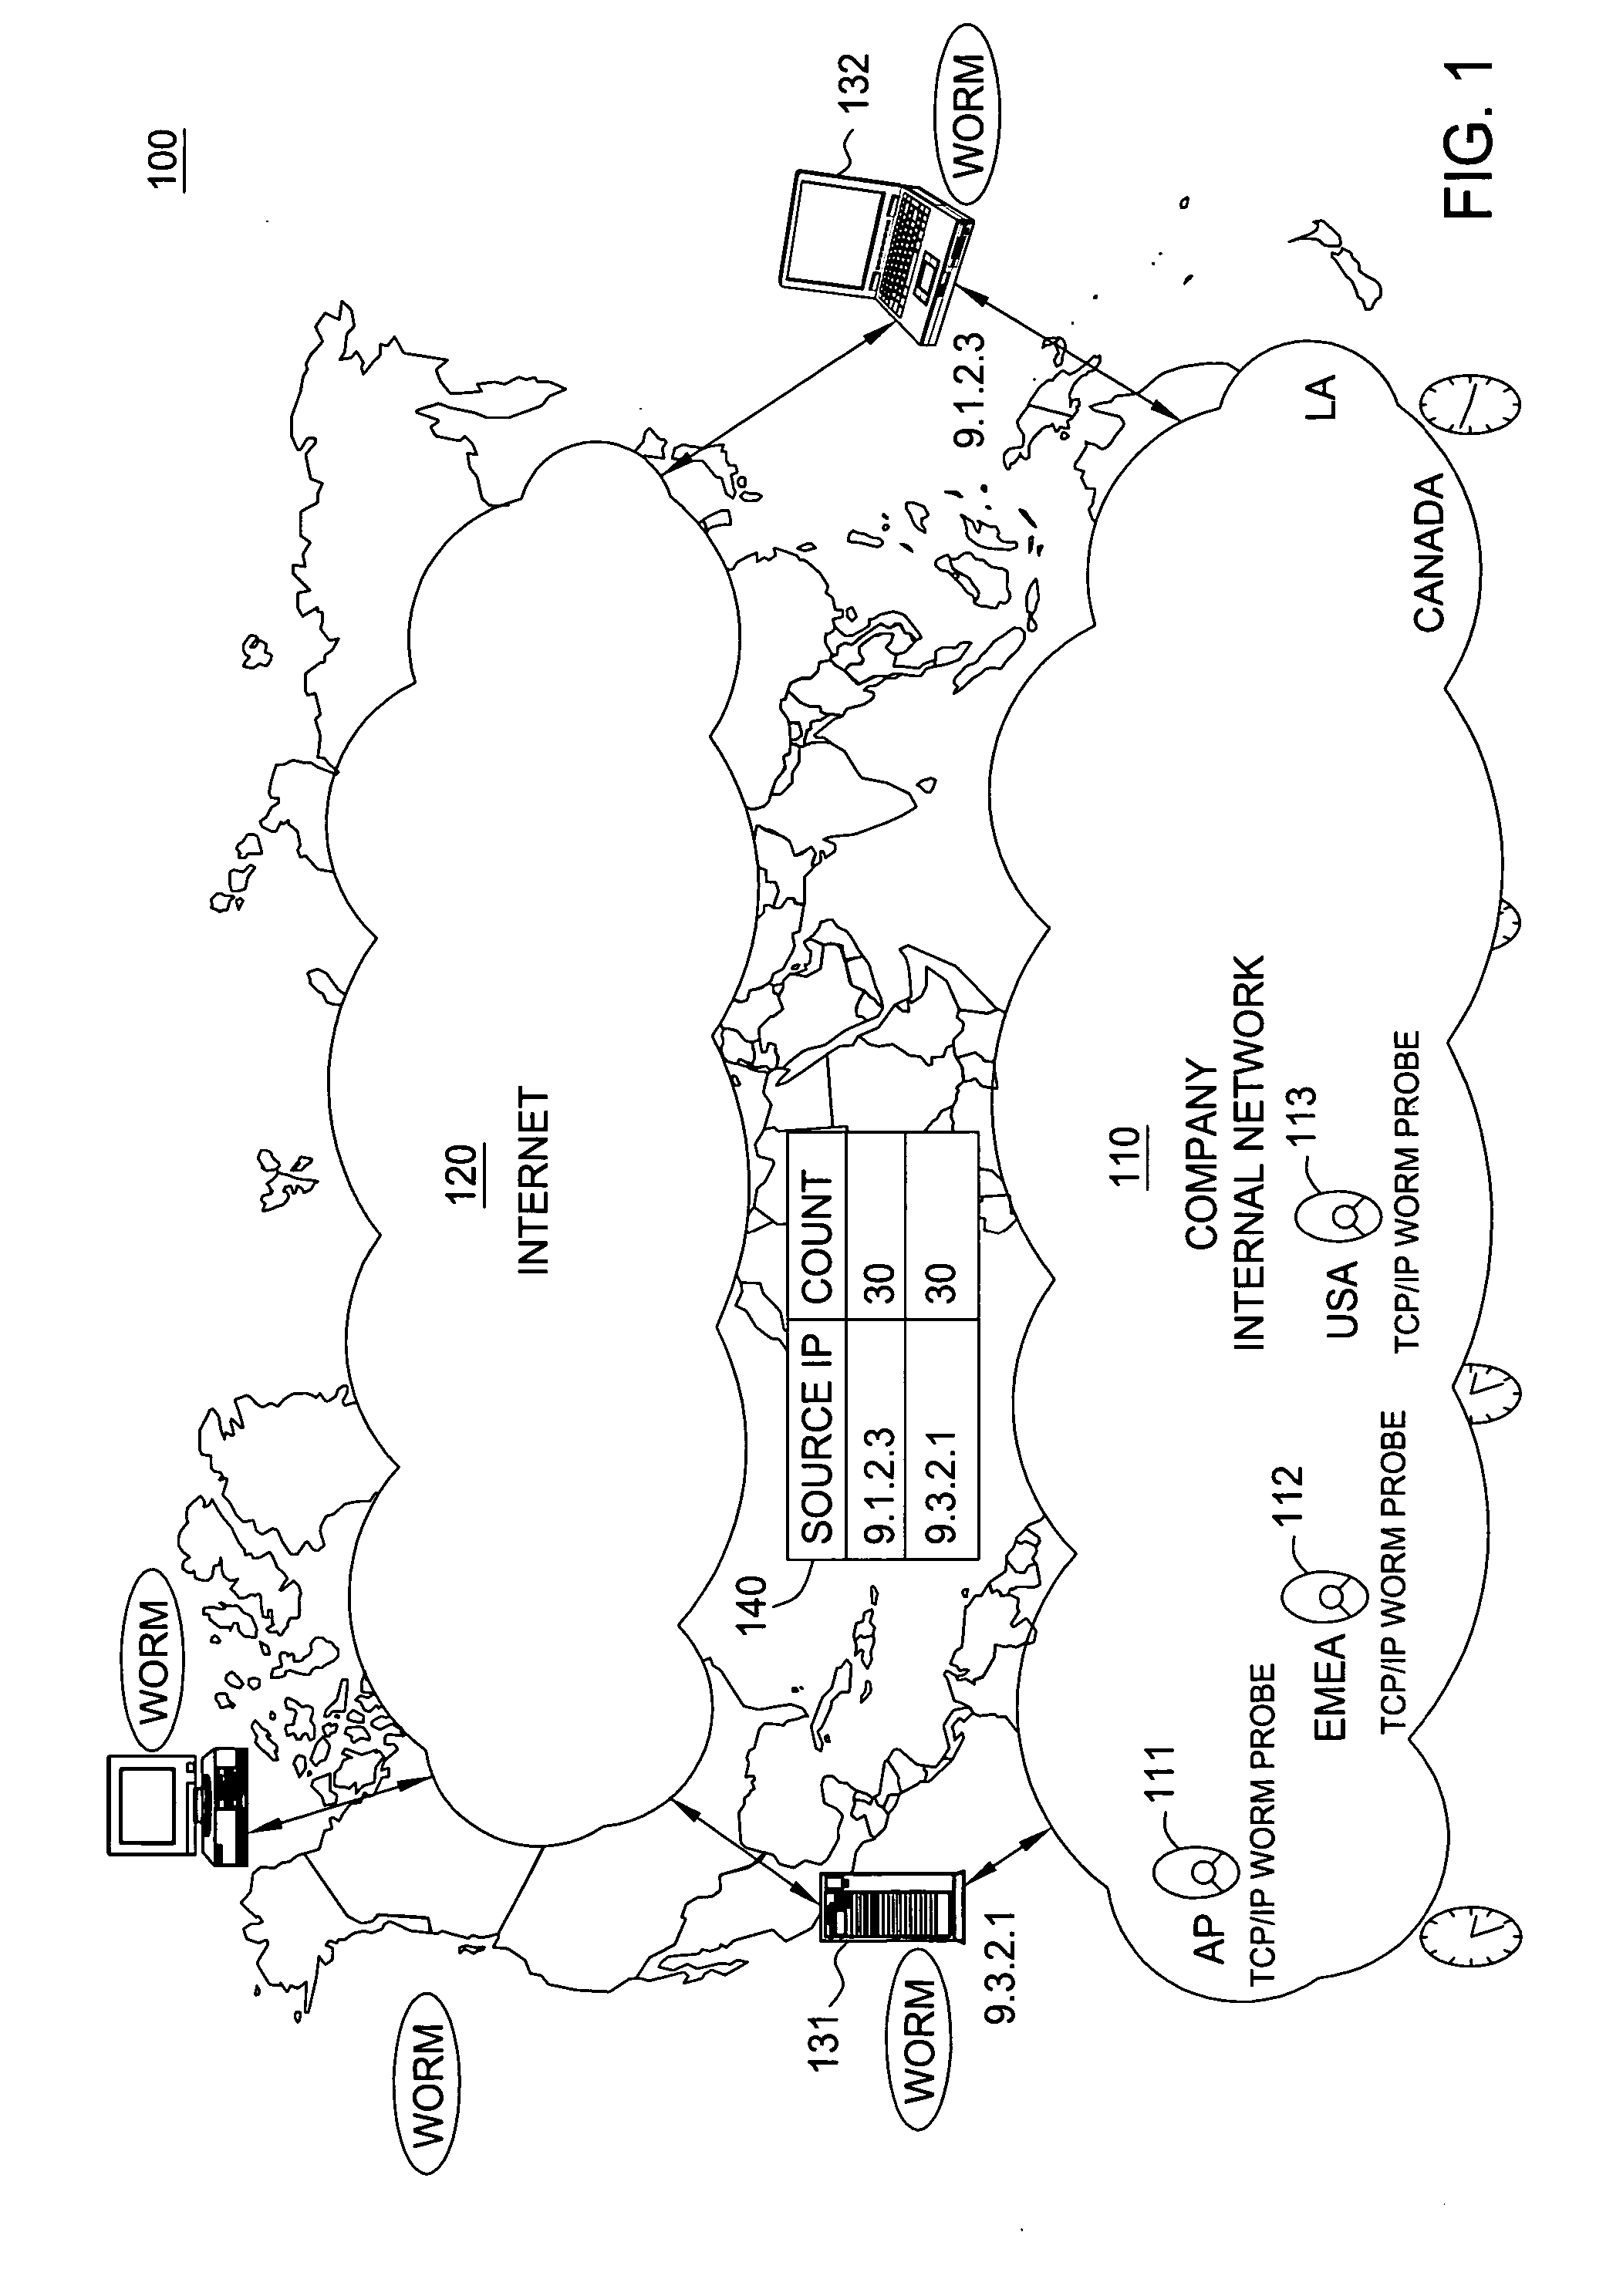 Method and apparatus for identifying and disabling worms in communication networks